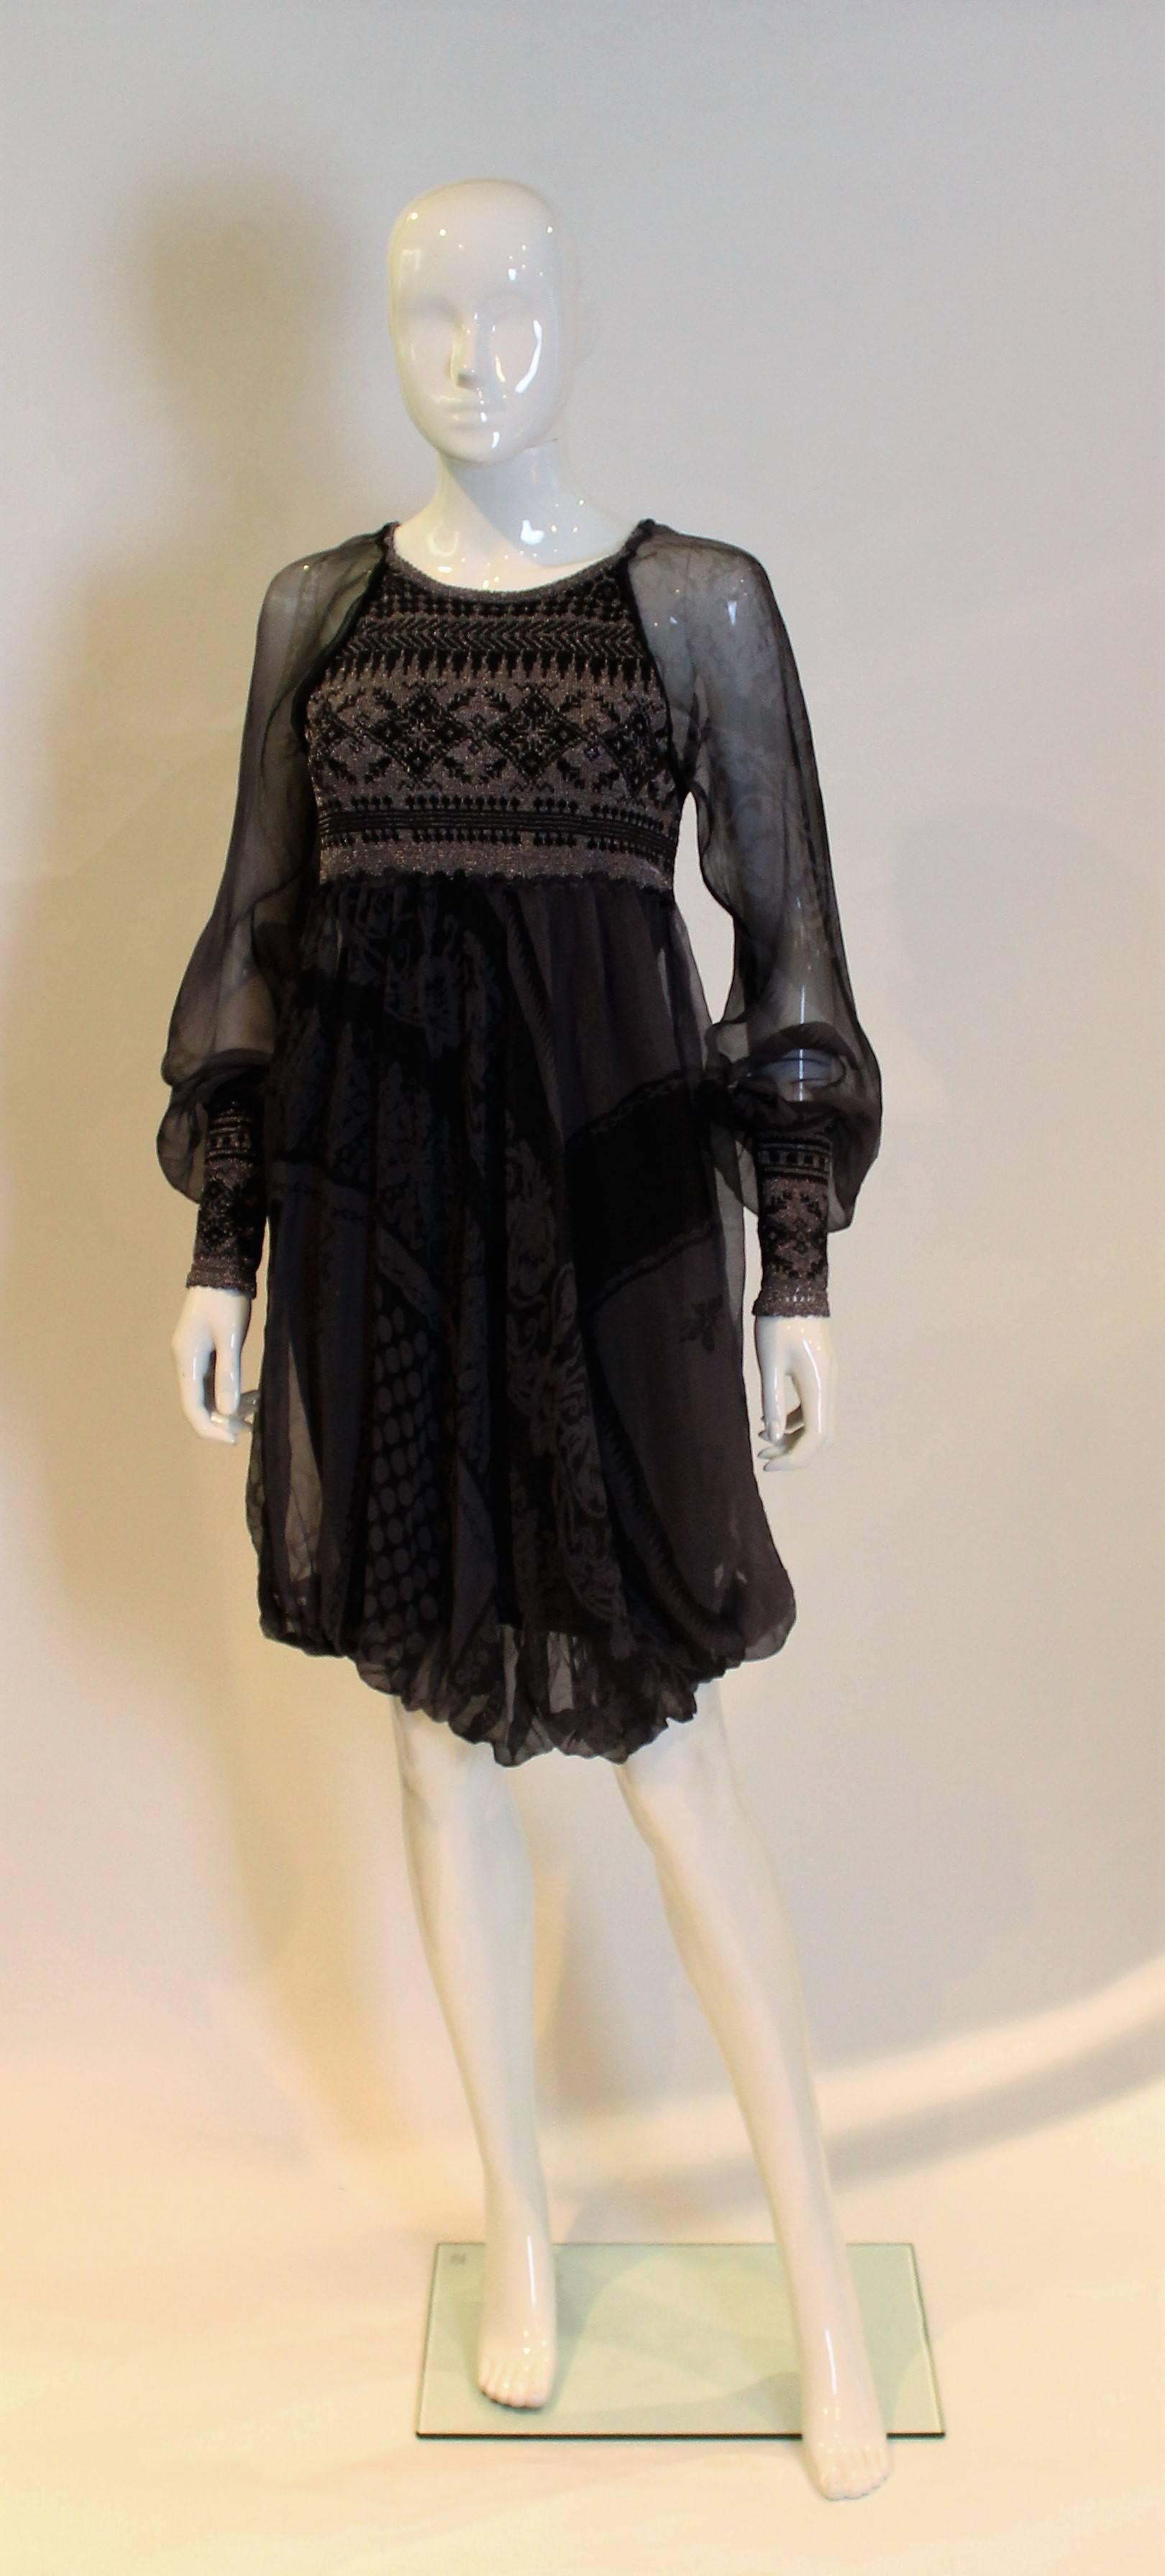 A chic dress by Jean Paul Gaultier. The trunk of the dress is knitted , in black and silver. The sleeves are silk, and there is a silk over skirt over the kitted body.The dress has elegent 6'' wide cuffs and a tie opening at the back.